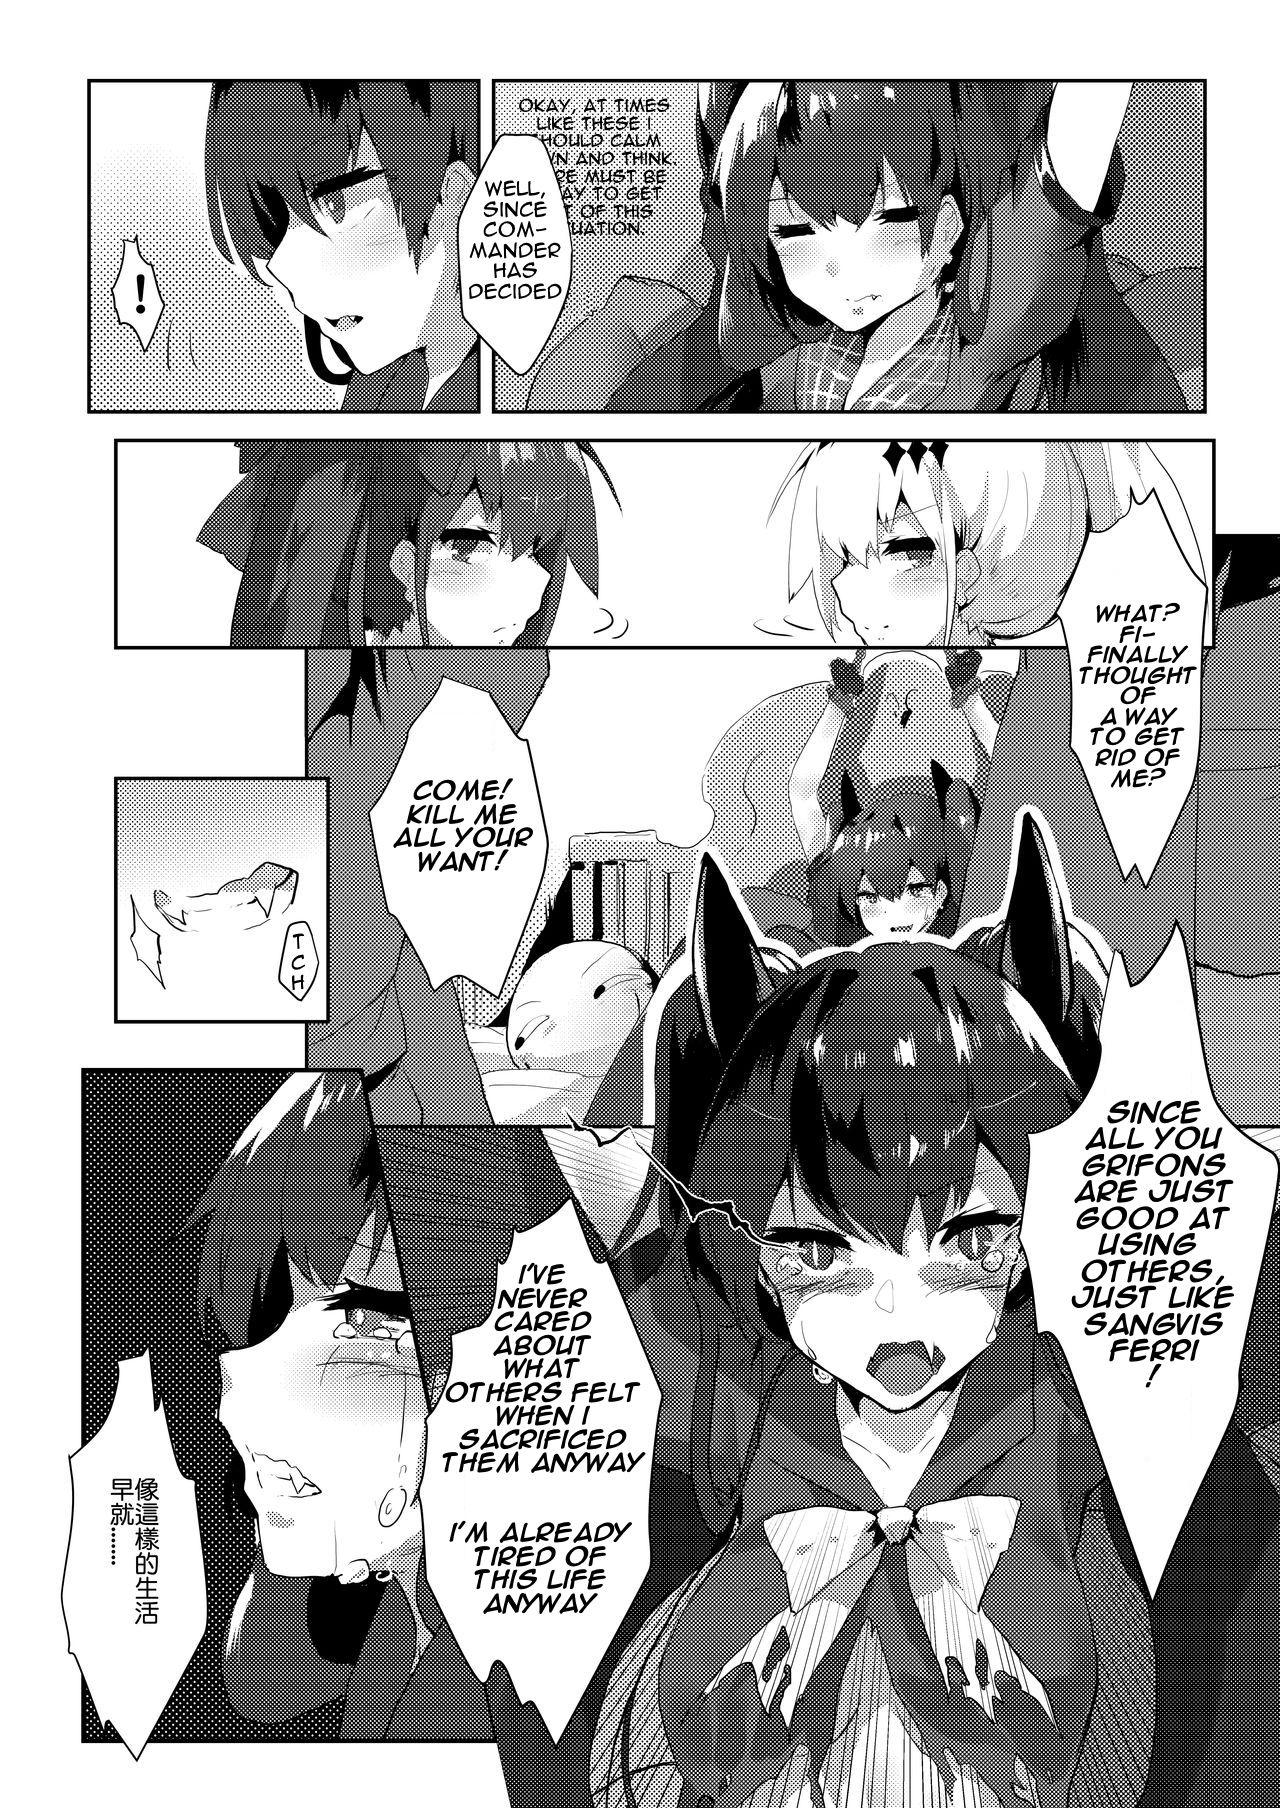 Indo 鐵血人型擴編中 SF Dummy Linking - Girls frontline Shemale Sex - Page 6